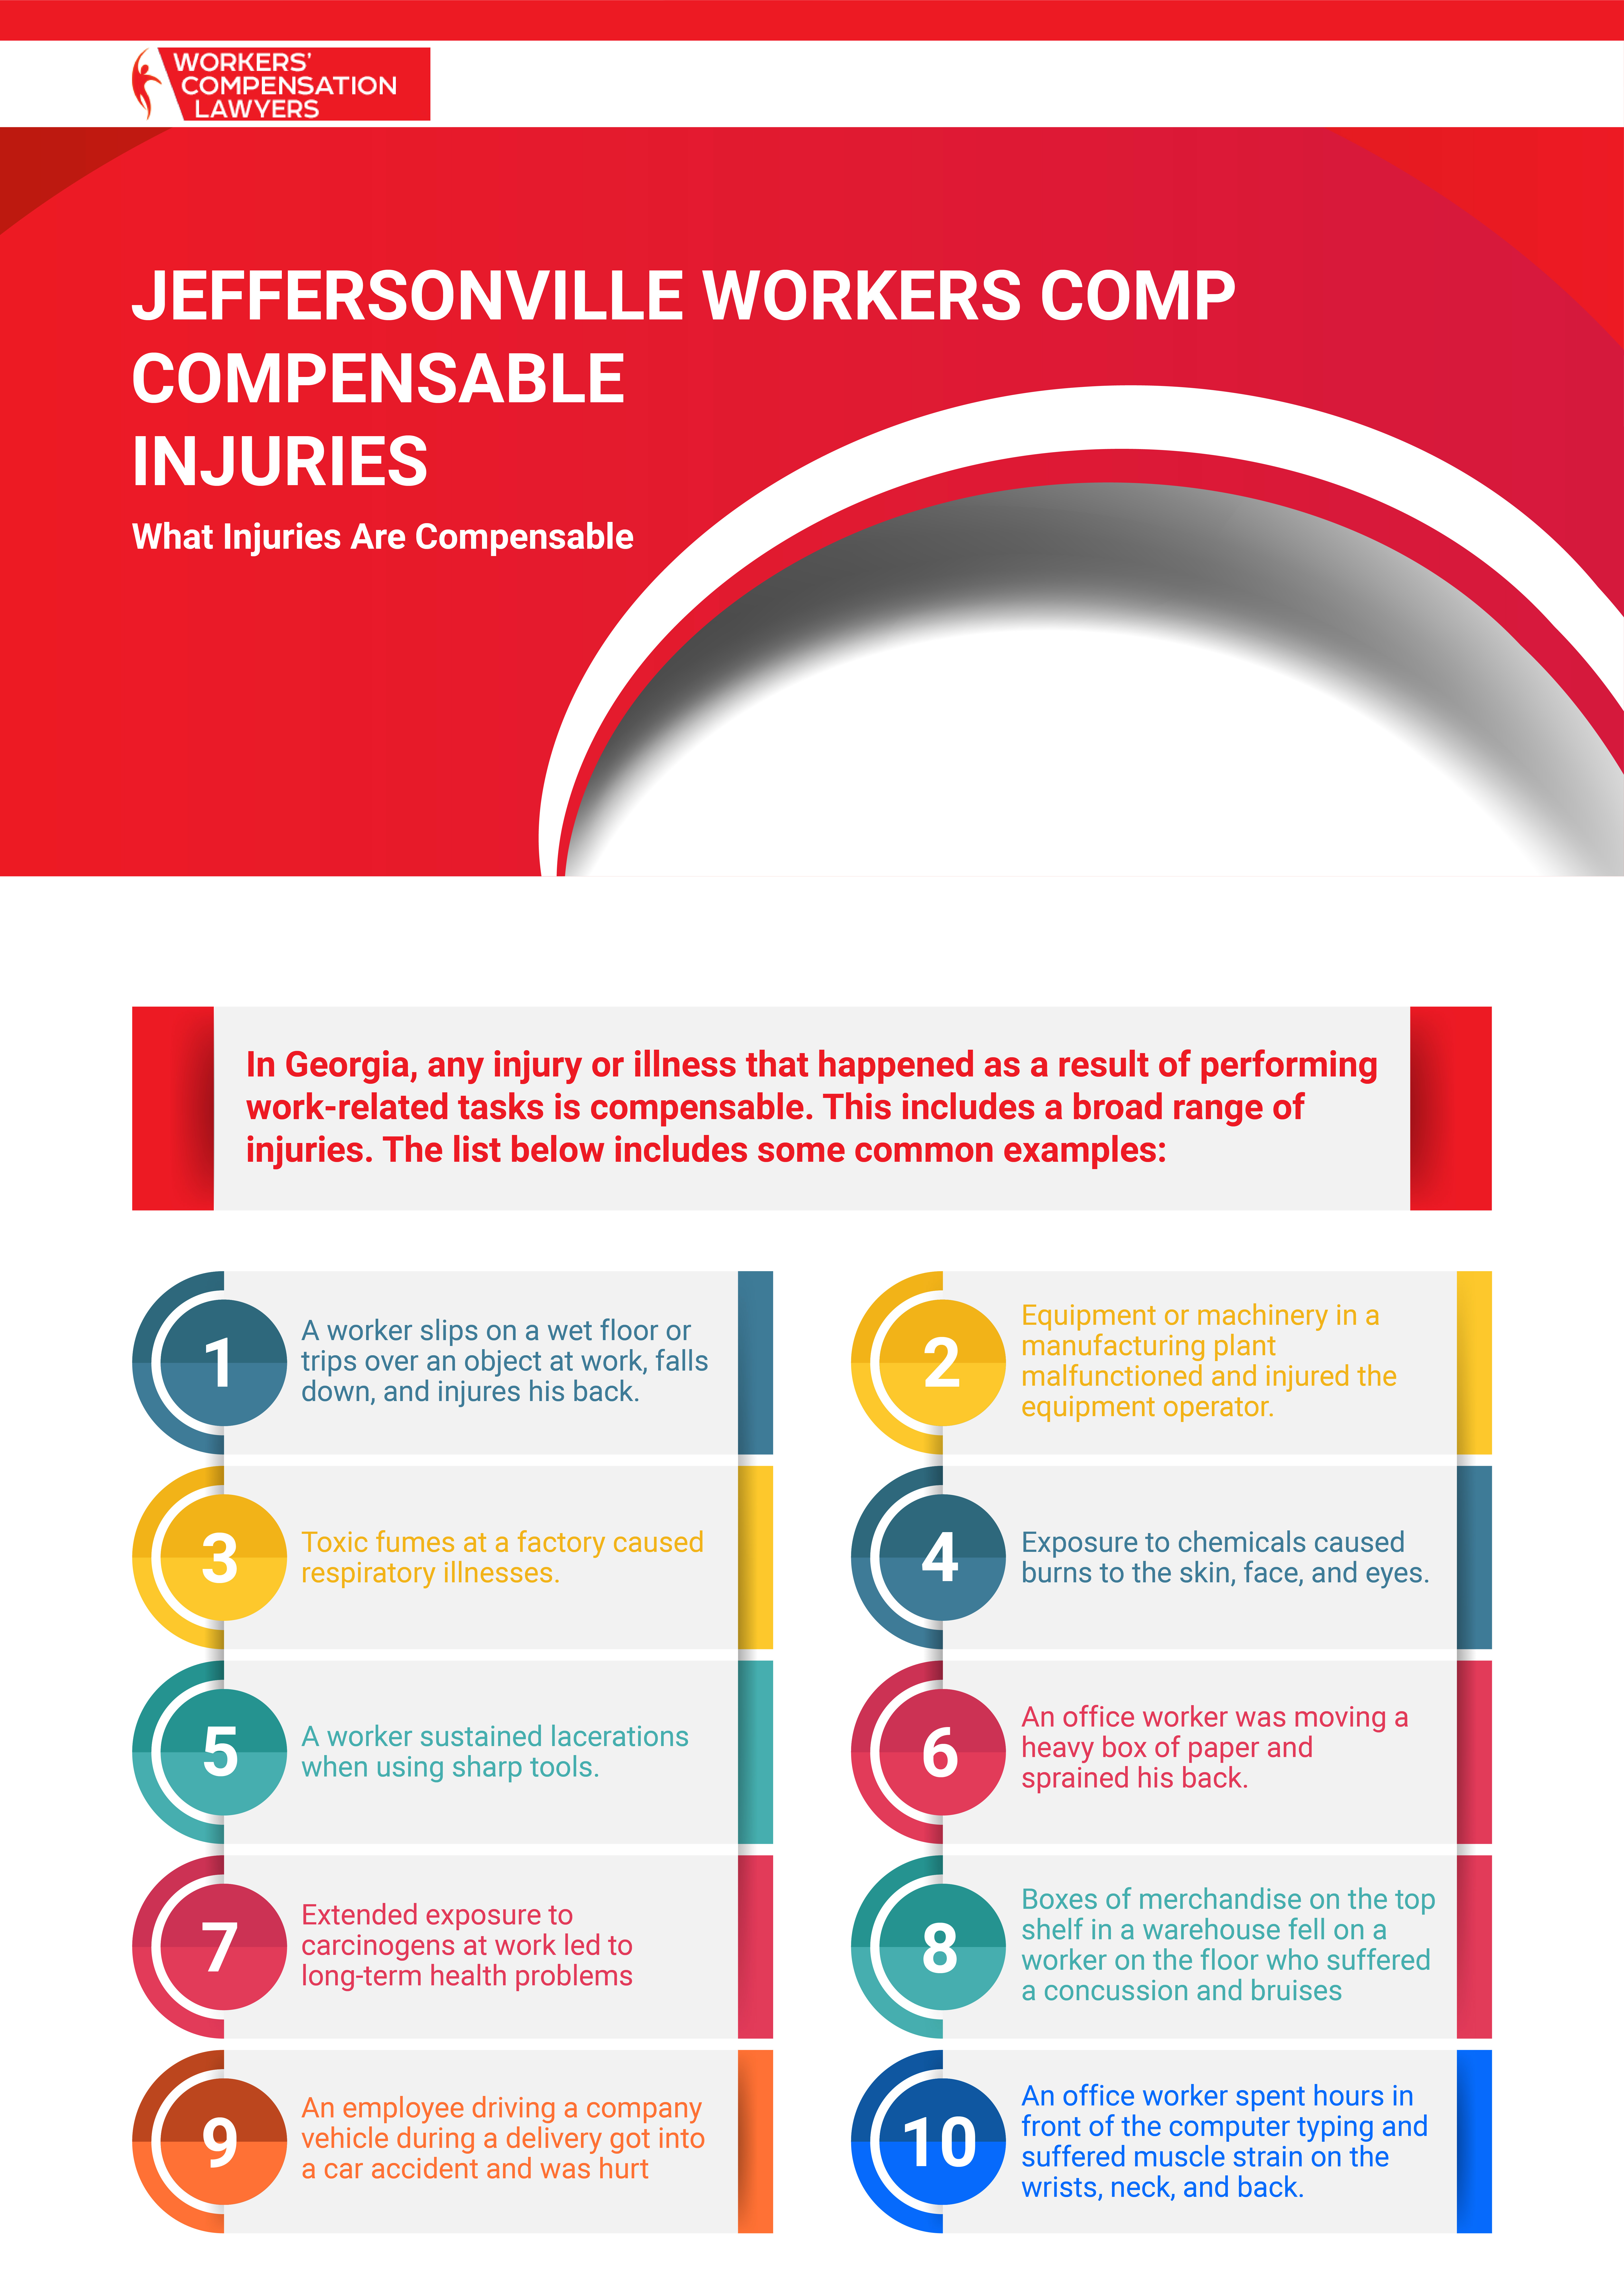 Jeffersonville Workers Compensation Compensable Injury Infographic